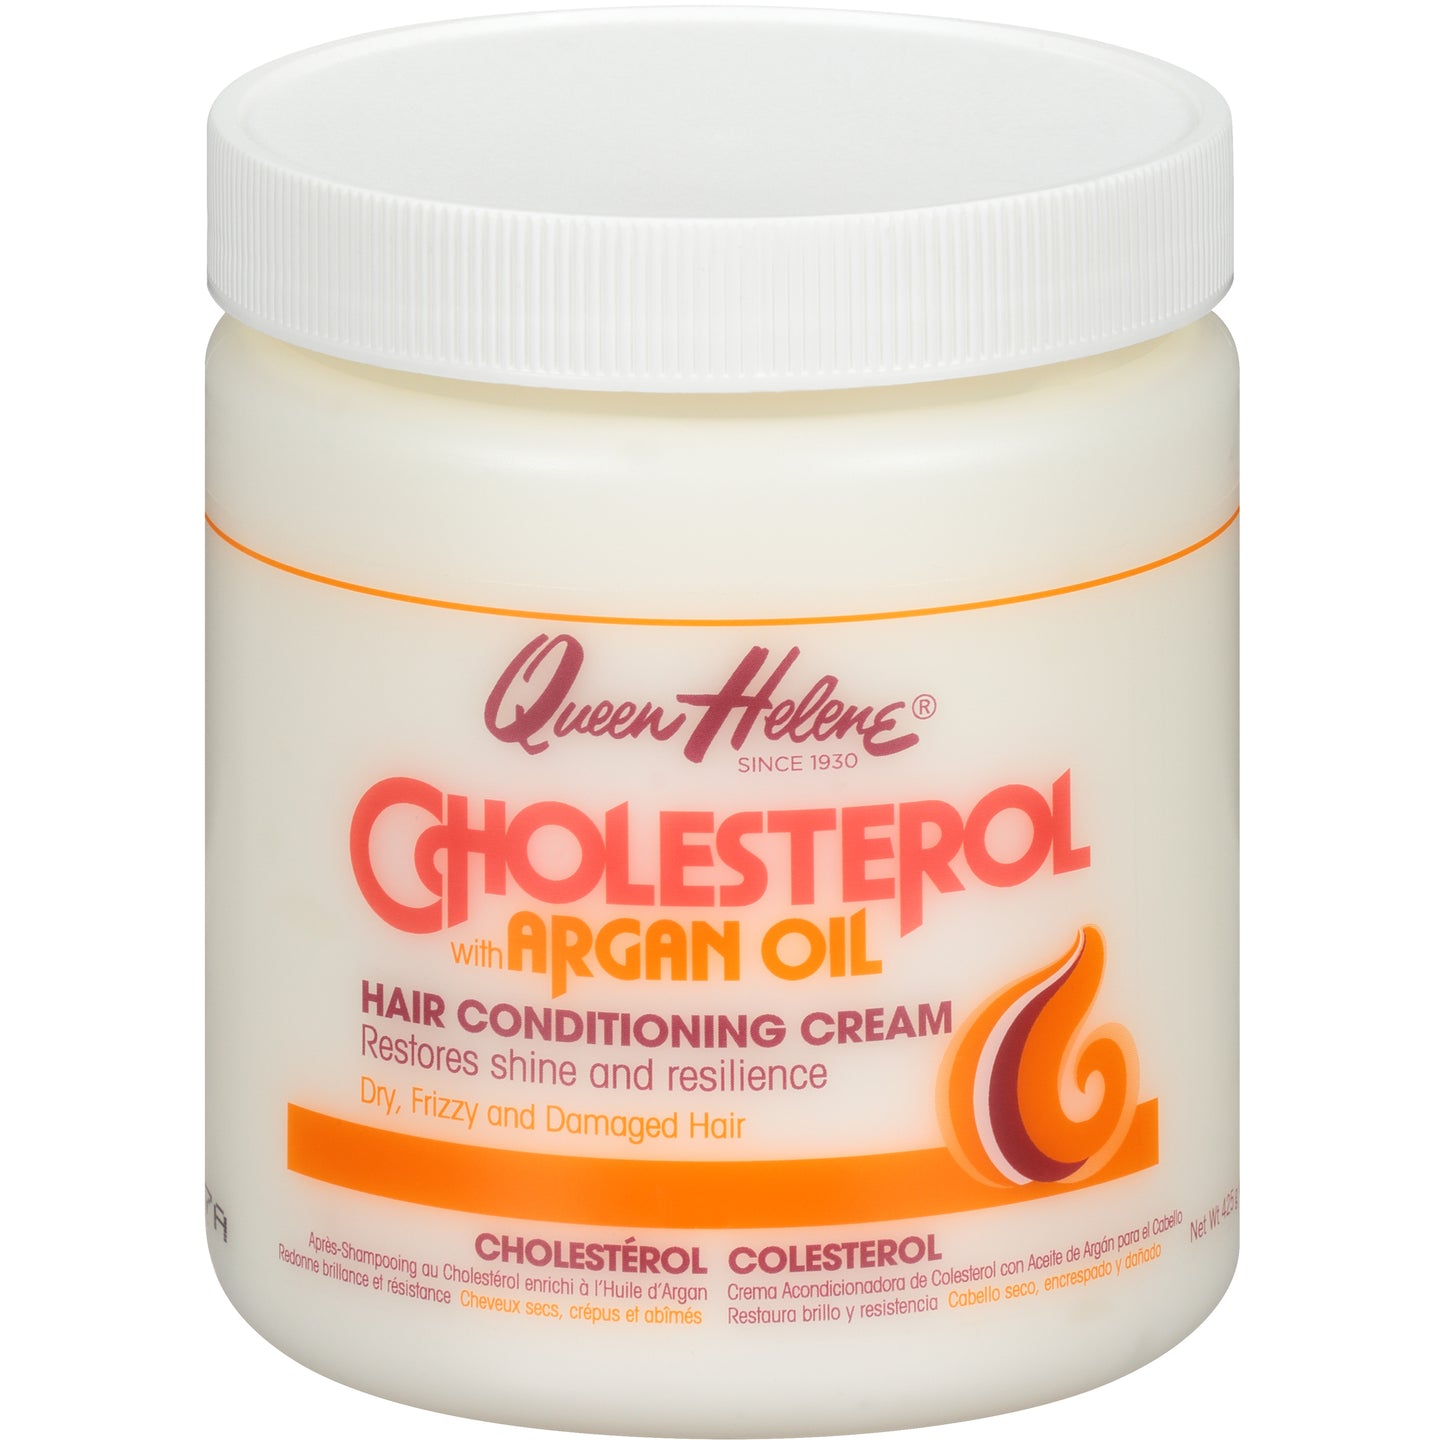 Queen Helene Cholesterol Hair Conditioning Cream With Argan Oil